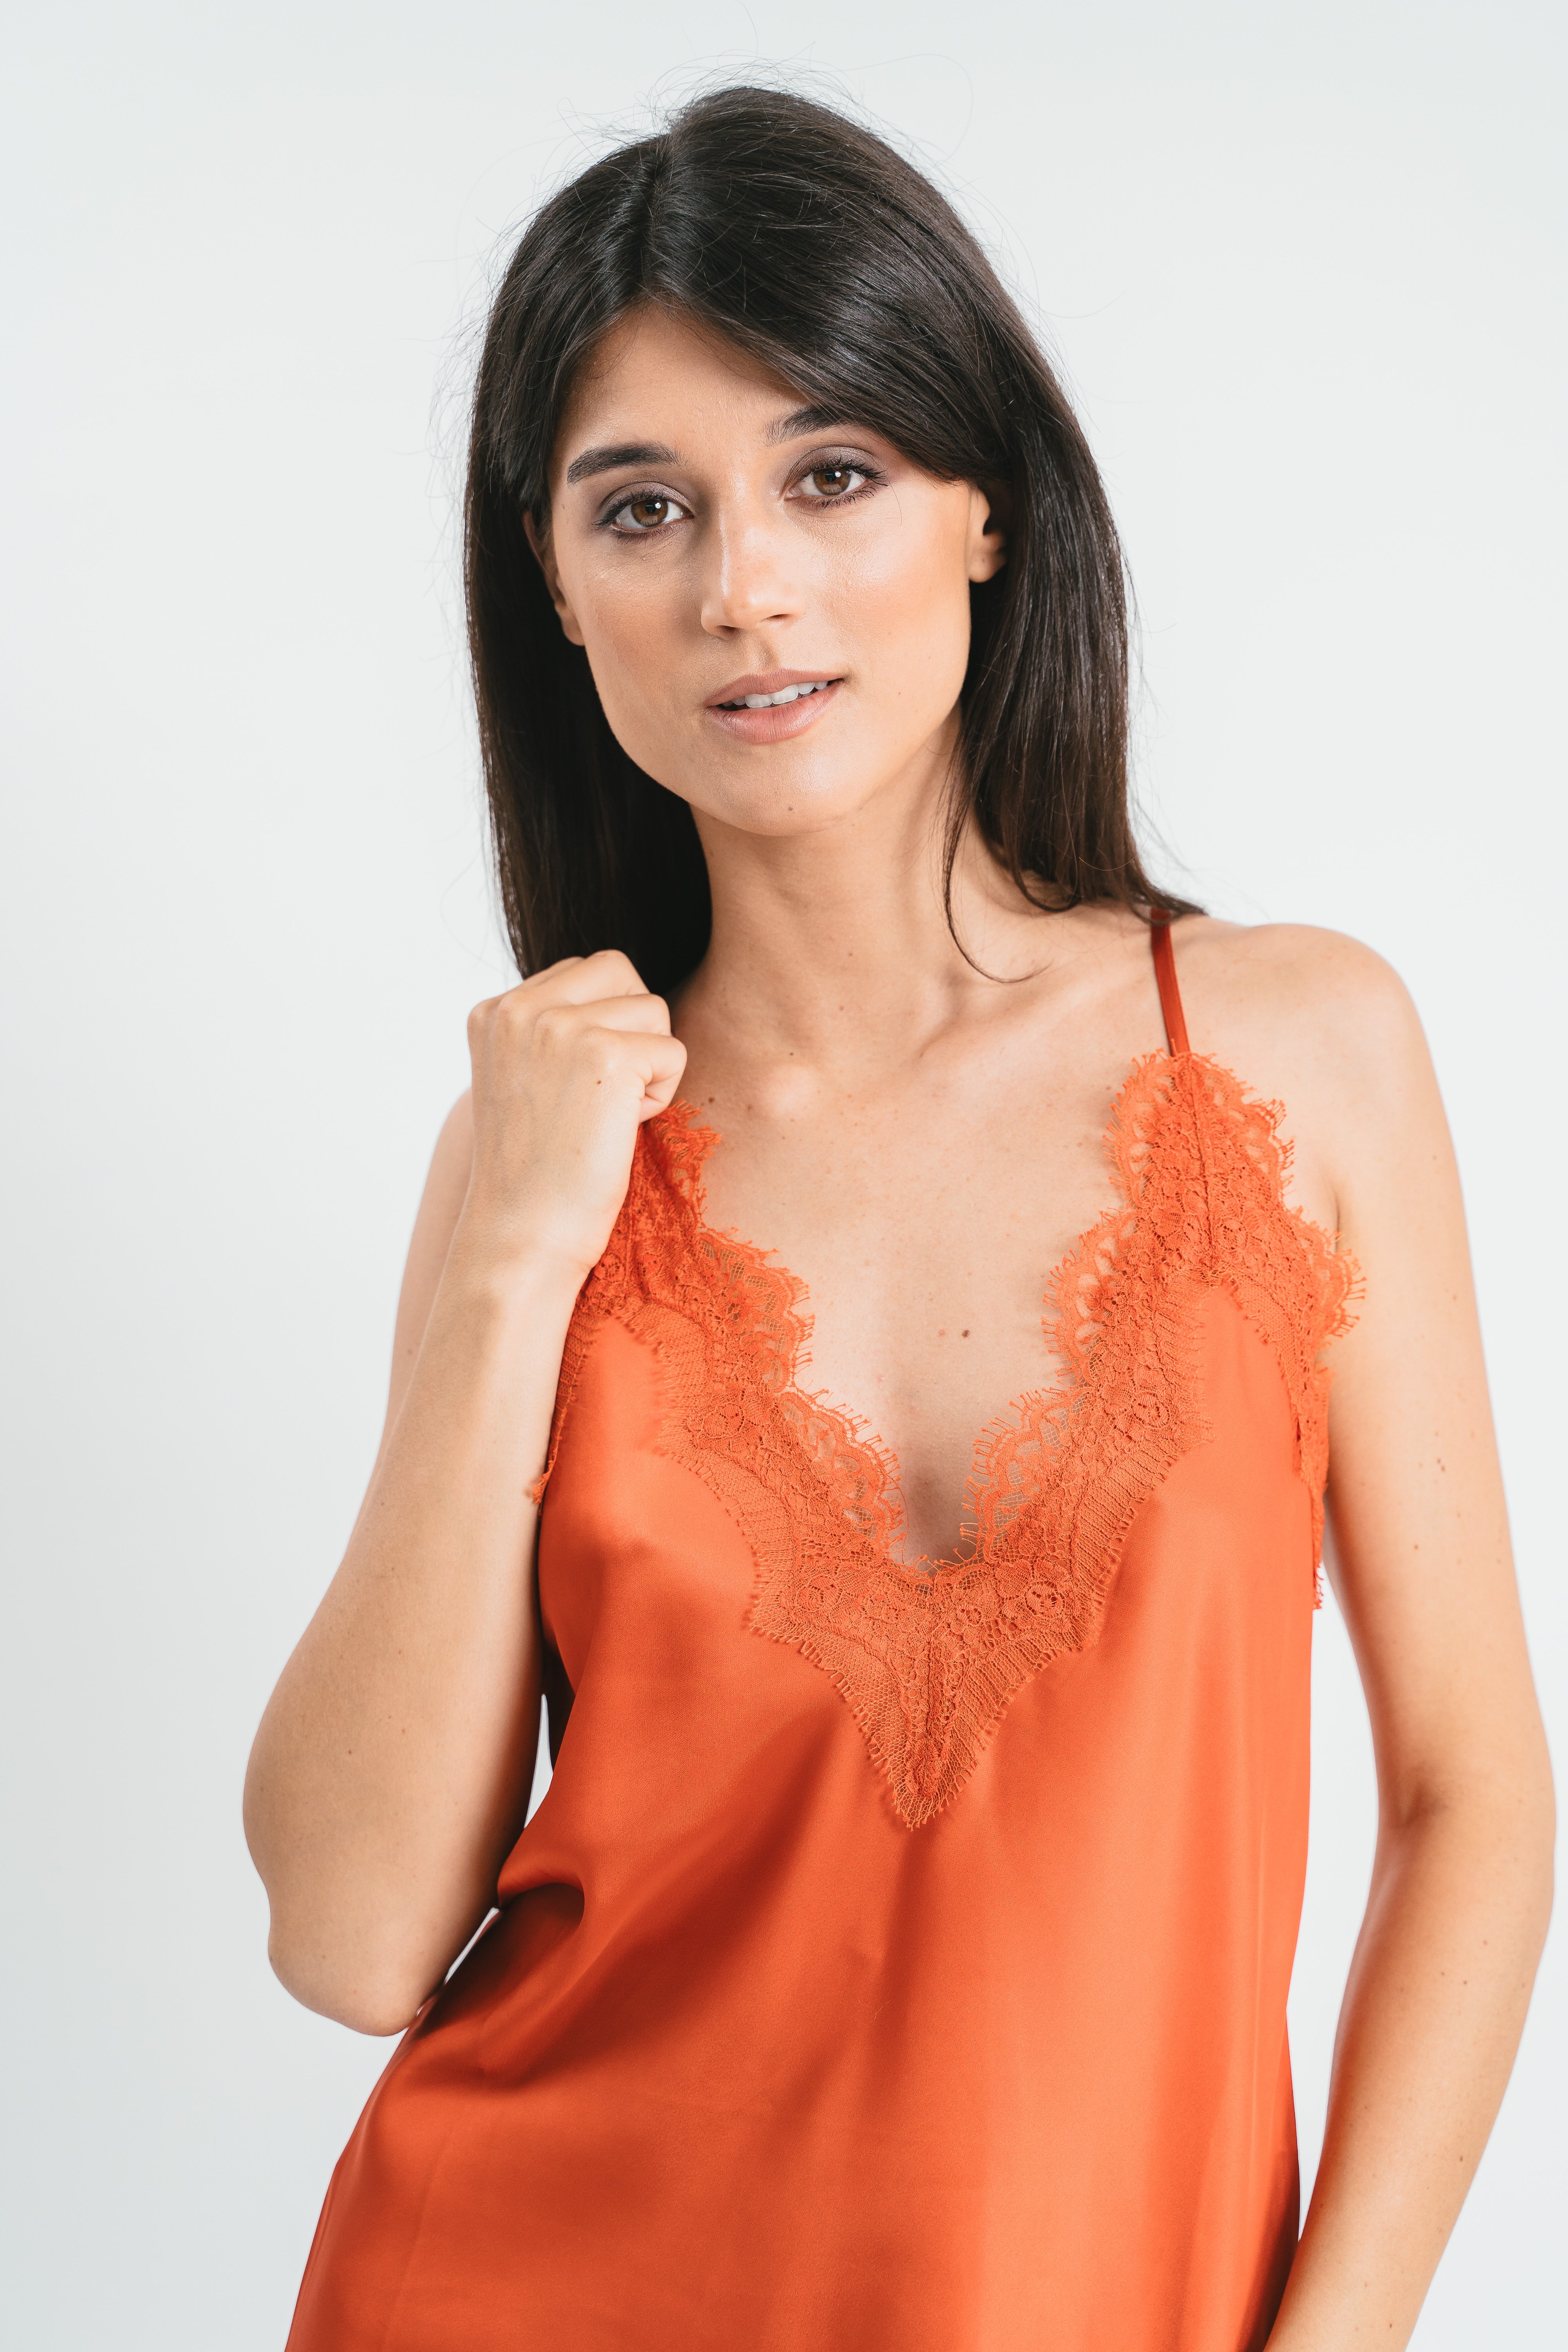 V-neck top with lace details